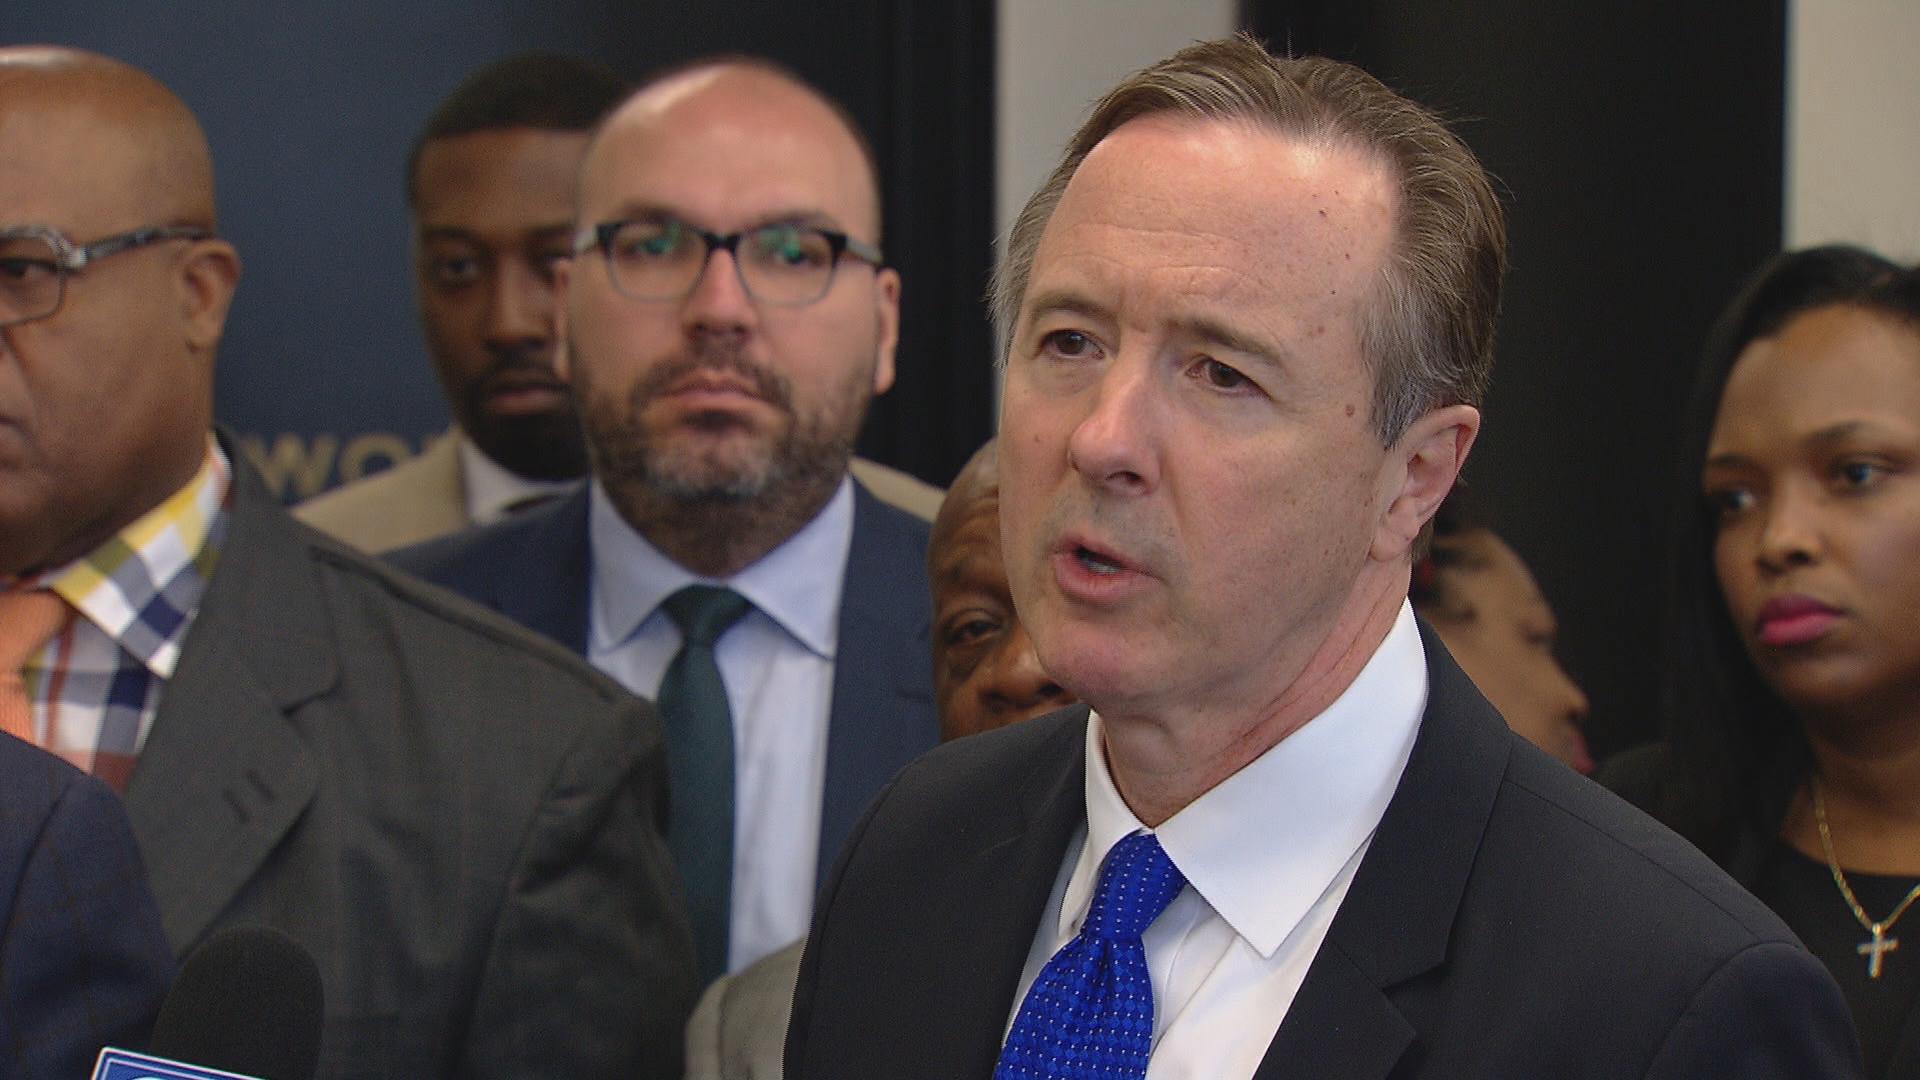 CPS CEO Forrest Claypool speaks to the press in April 2017. (Chicago Tonight)